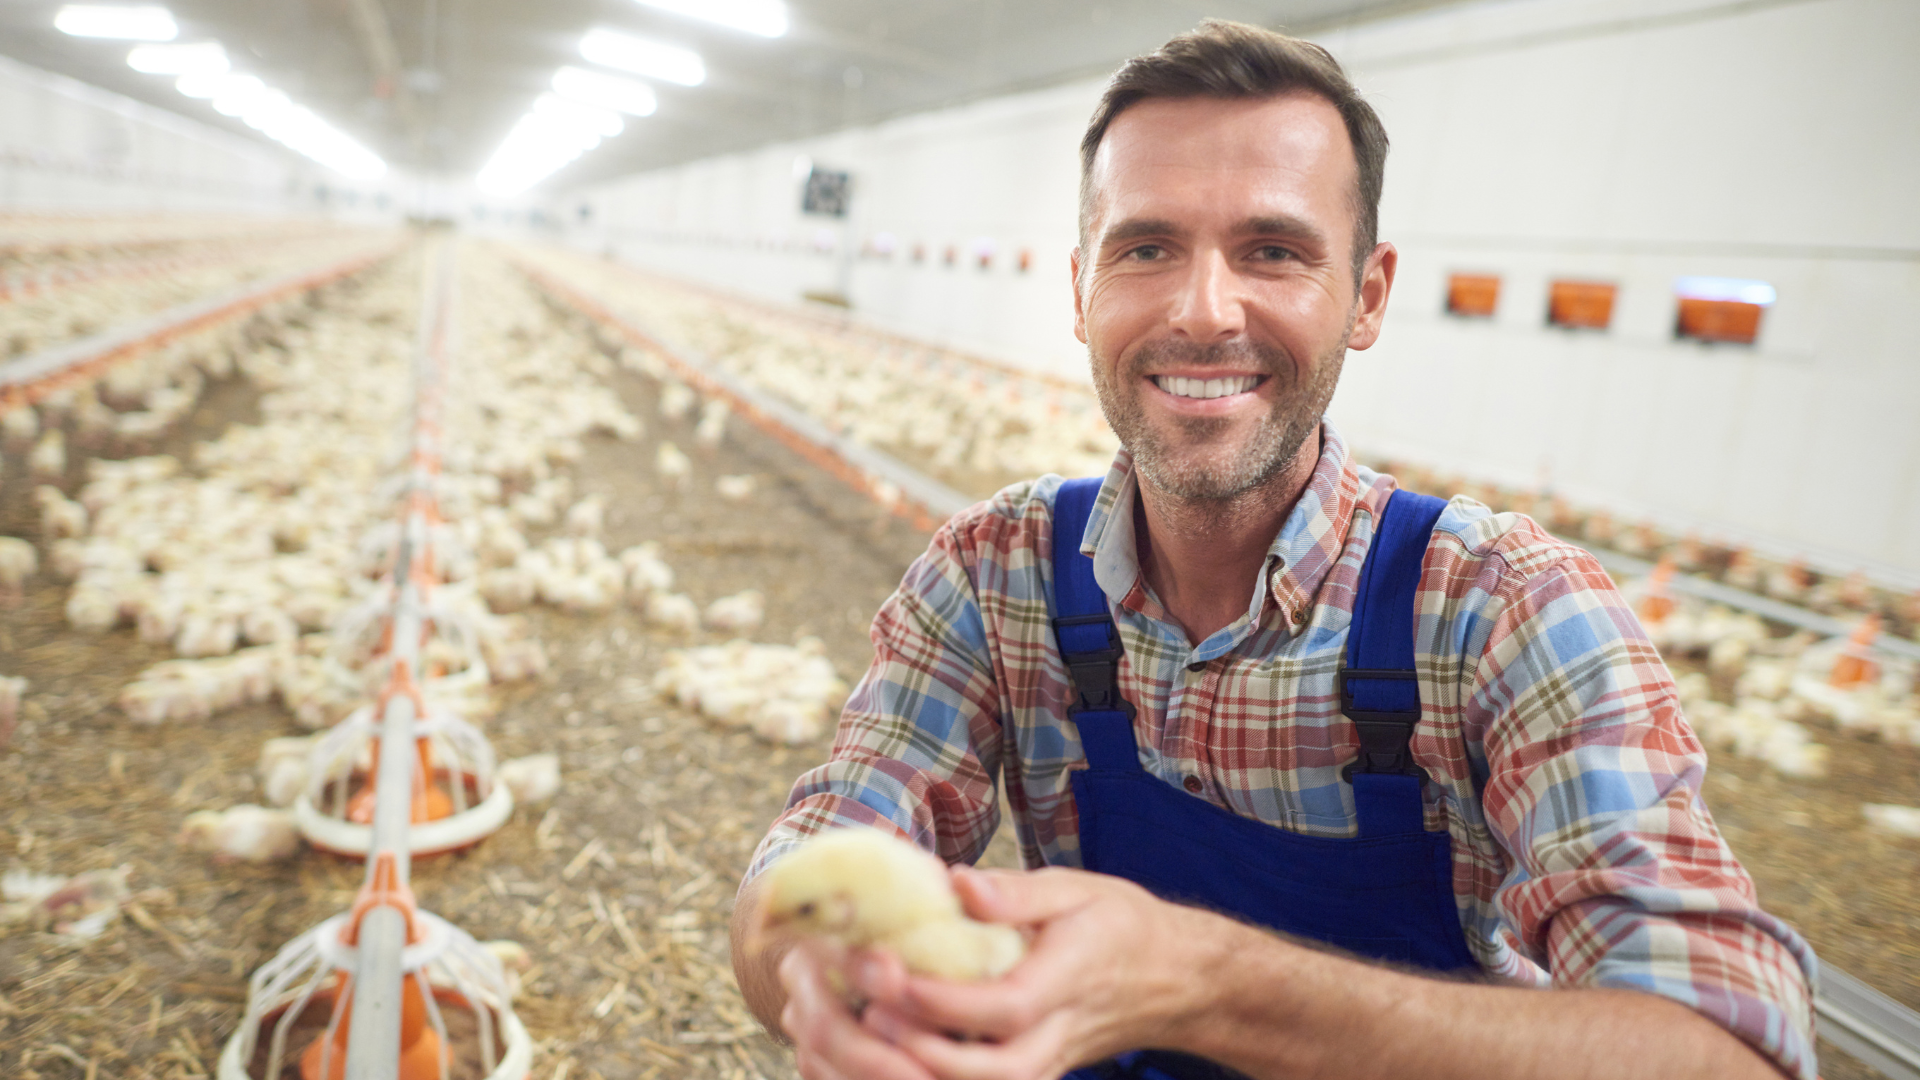 Smiling male farmer holding a chick.